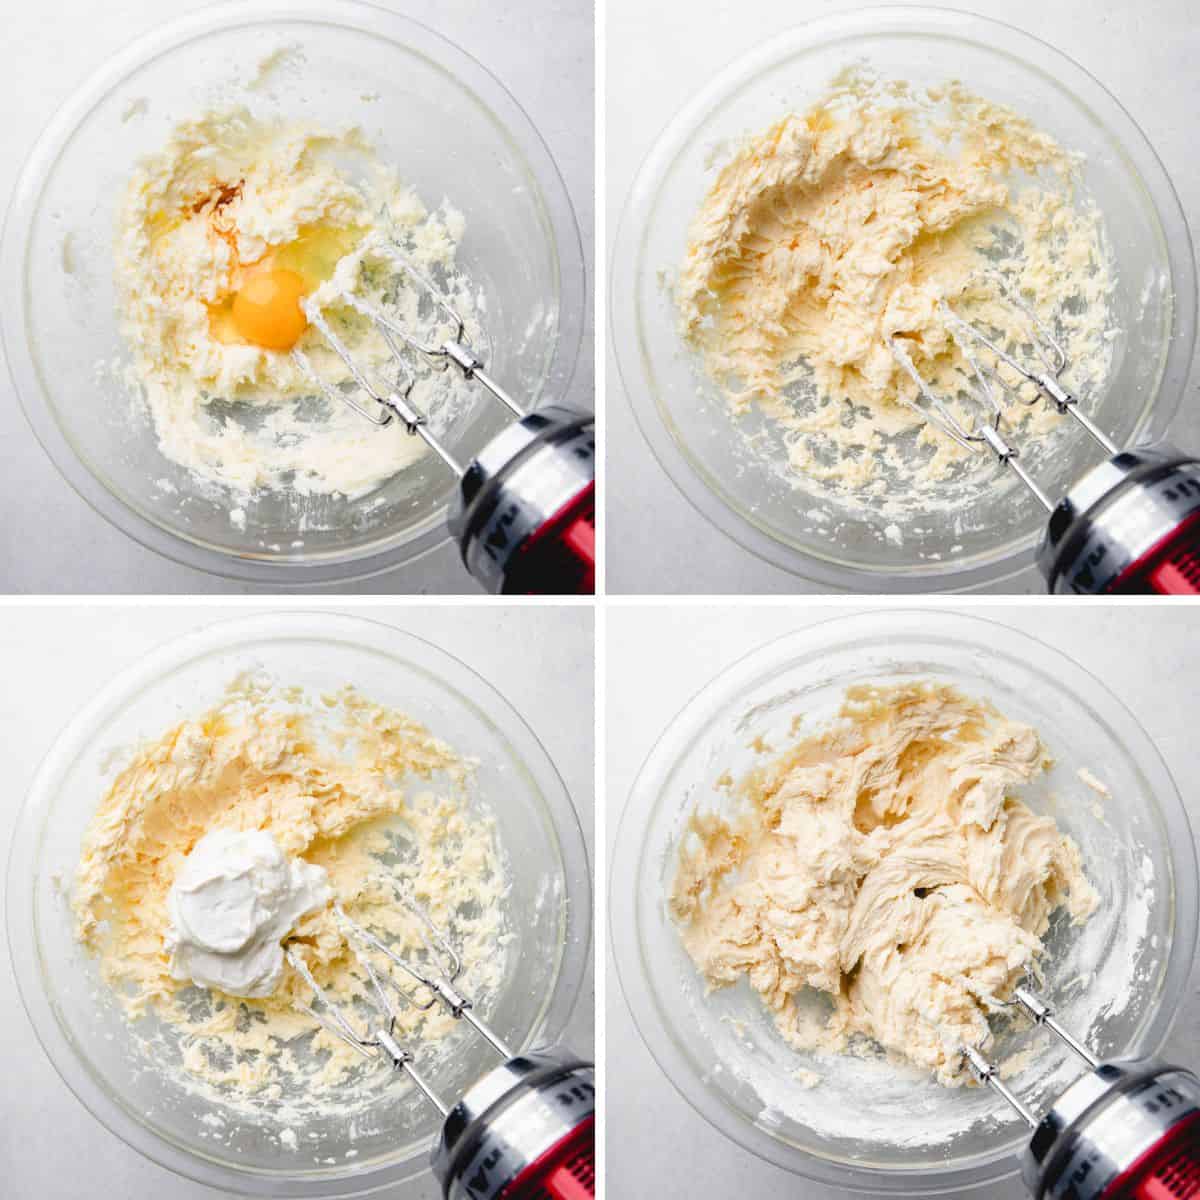 Process photos of adding egg, sour cream, and vanilla extract to cookie dough.